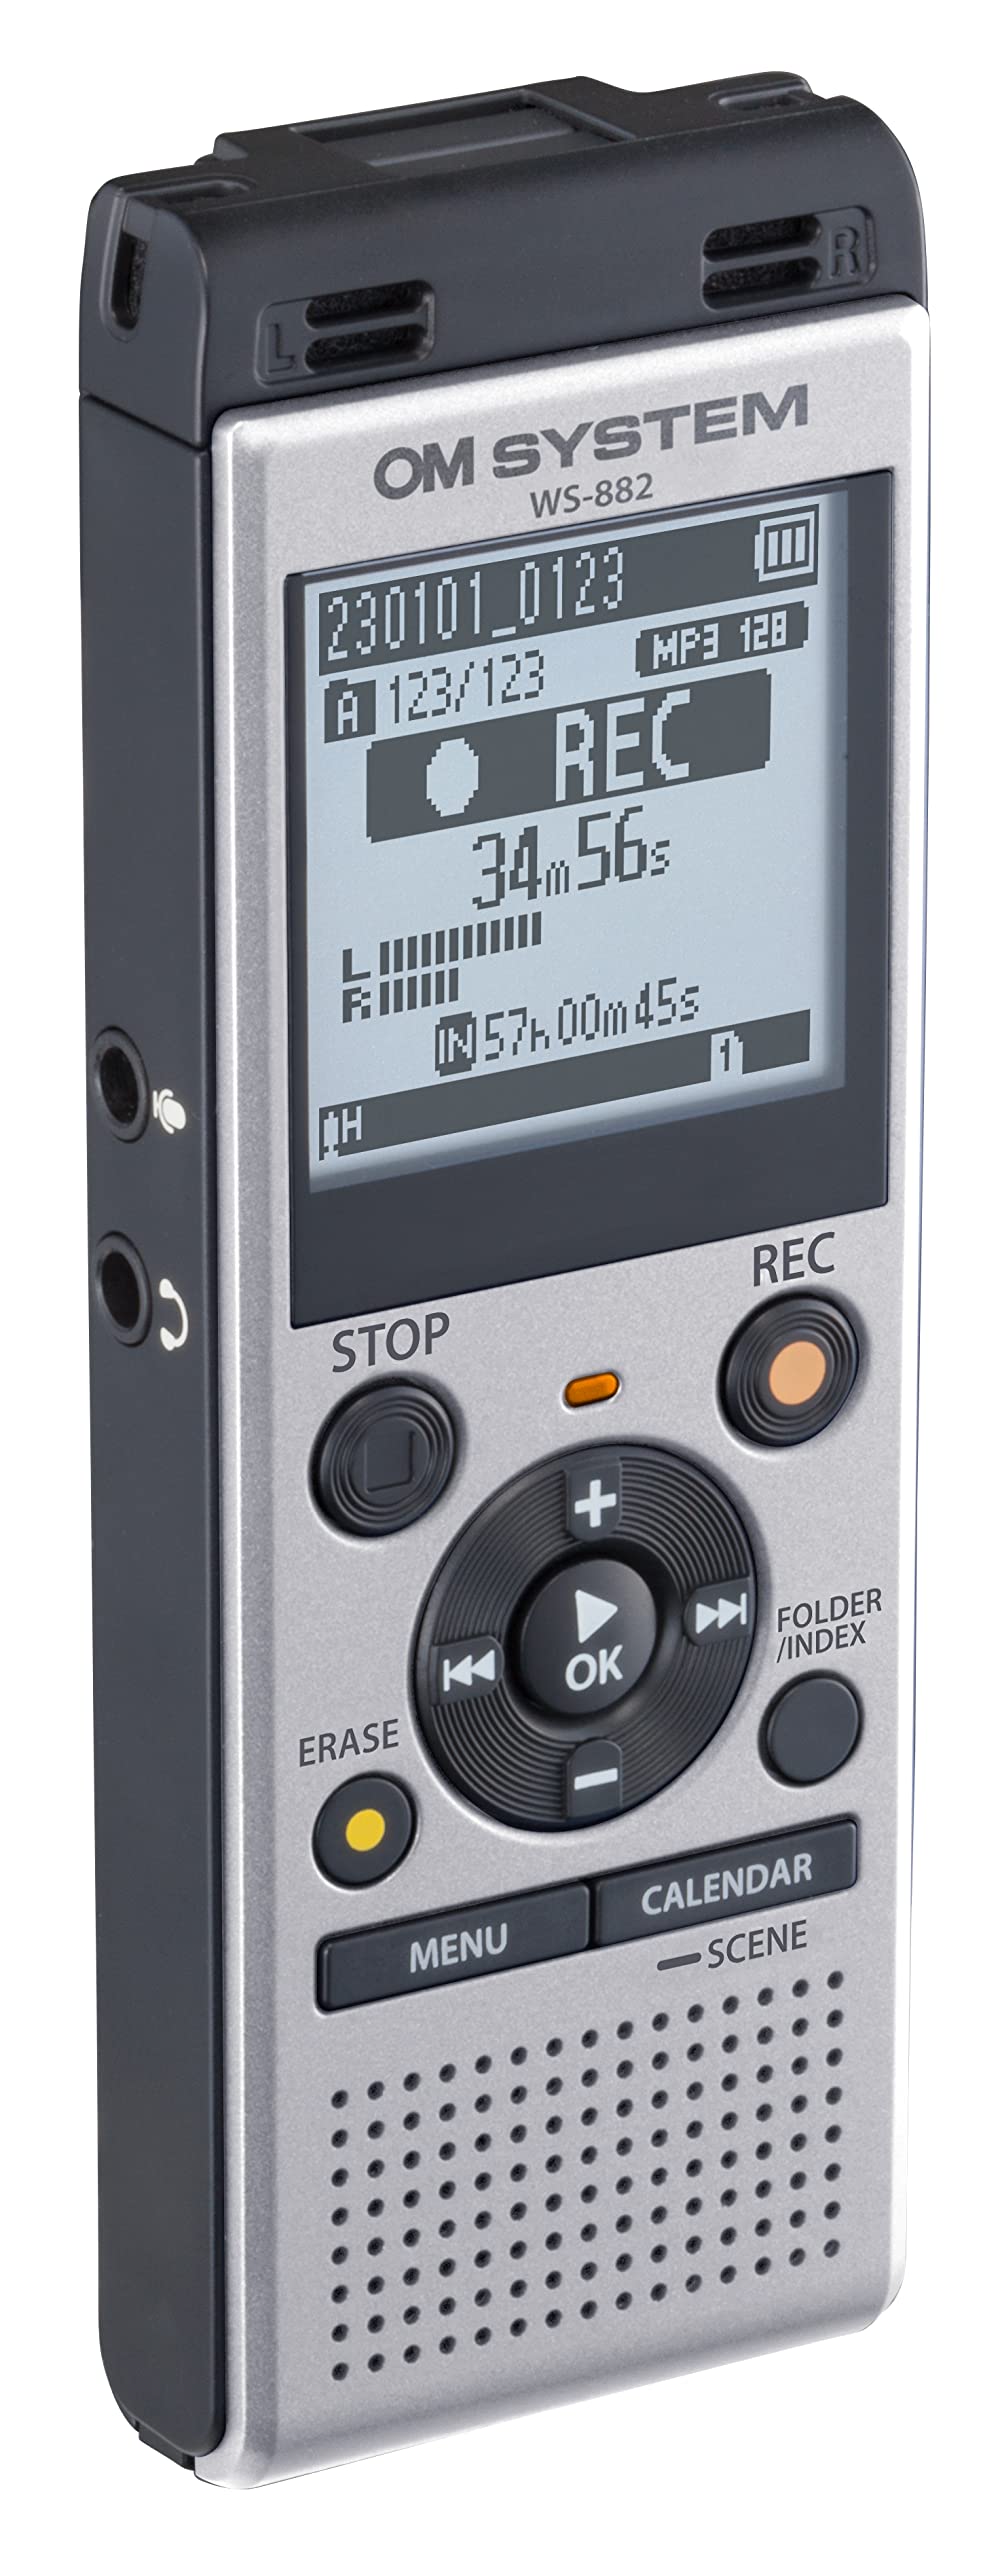 Olympus OM System WS-882 Digital Voice Recorder, with Linear PCM/MP3 Recording Formats, USB Direct, 4gb Playback Speed and Volume Adjust, File Index, Erase Selected Files